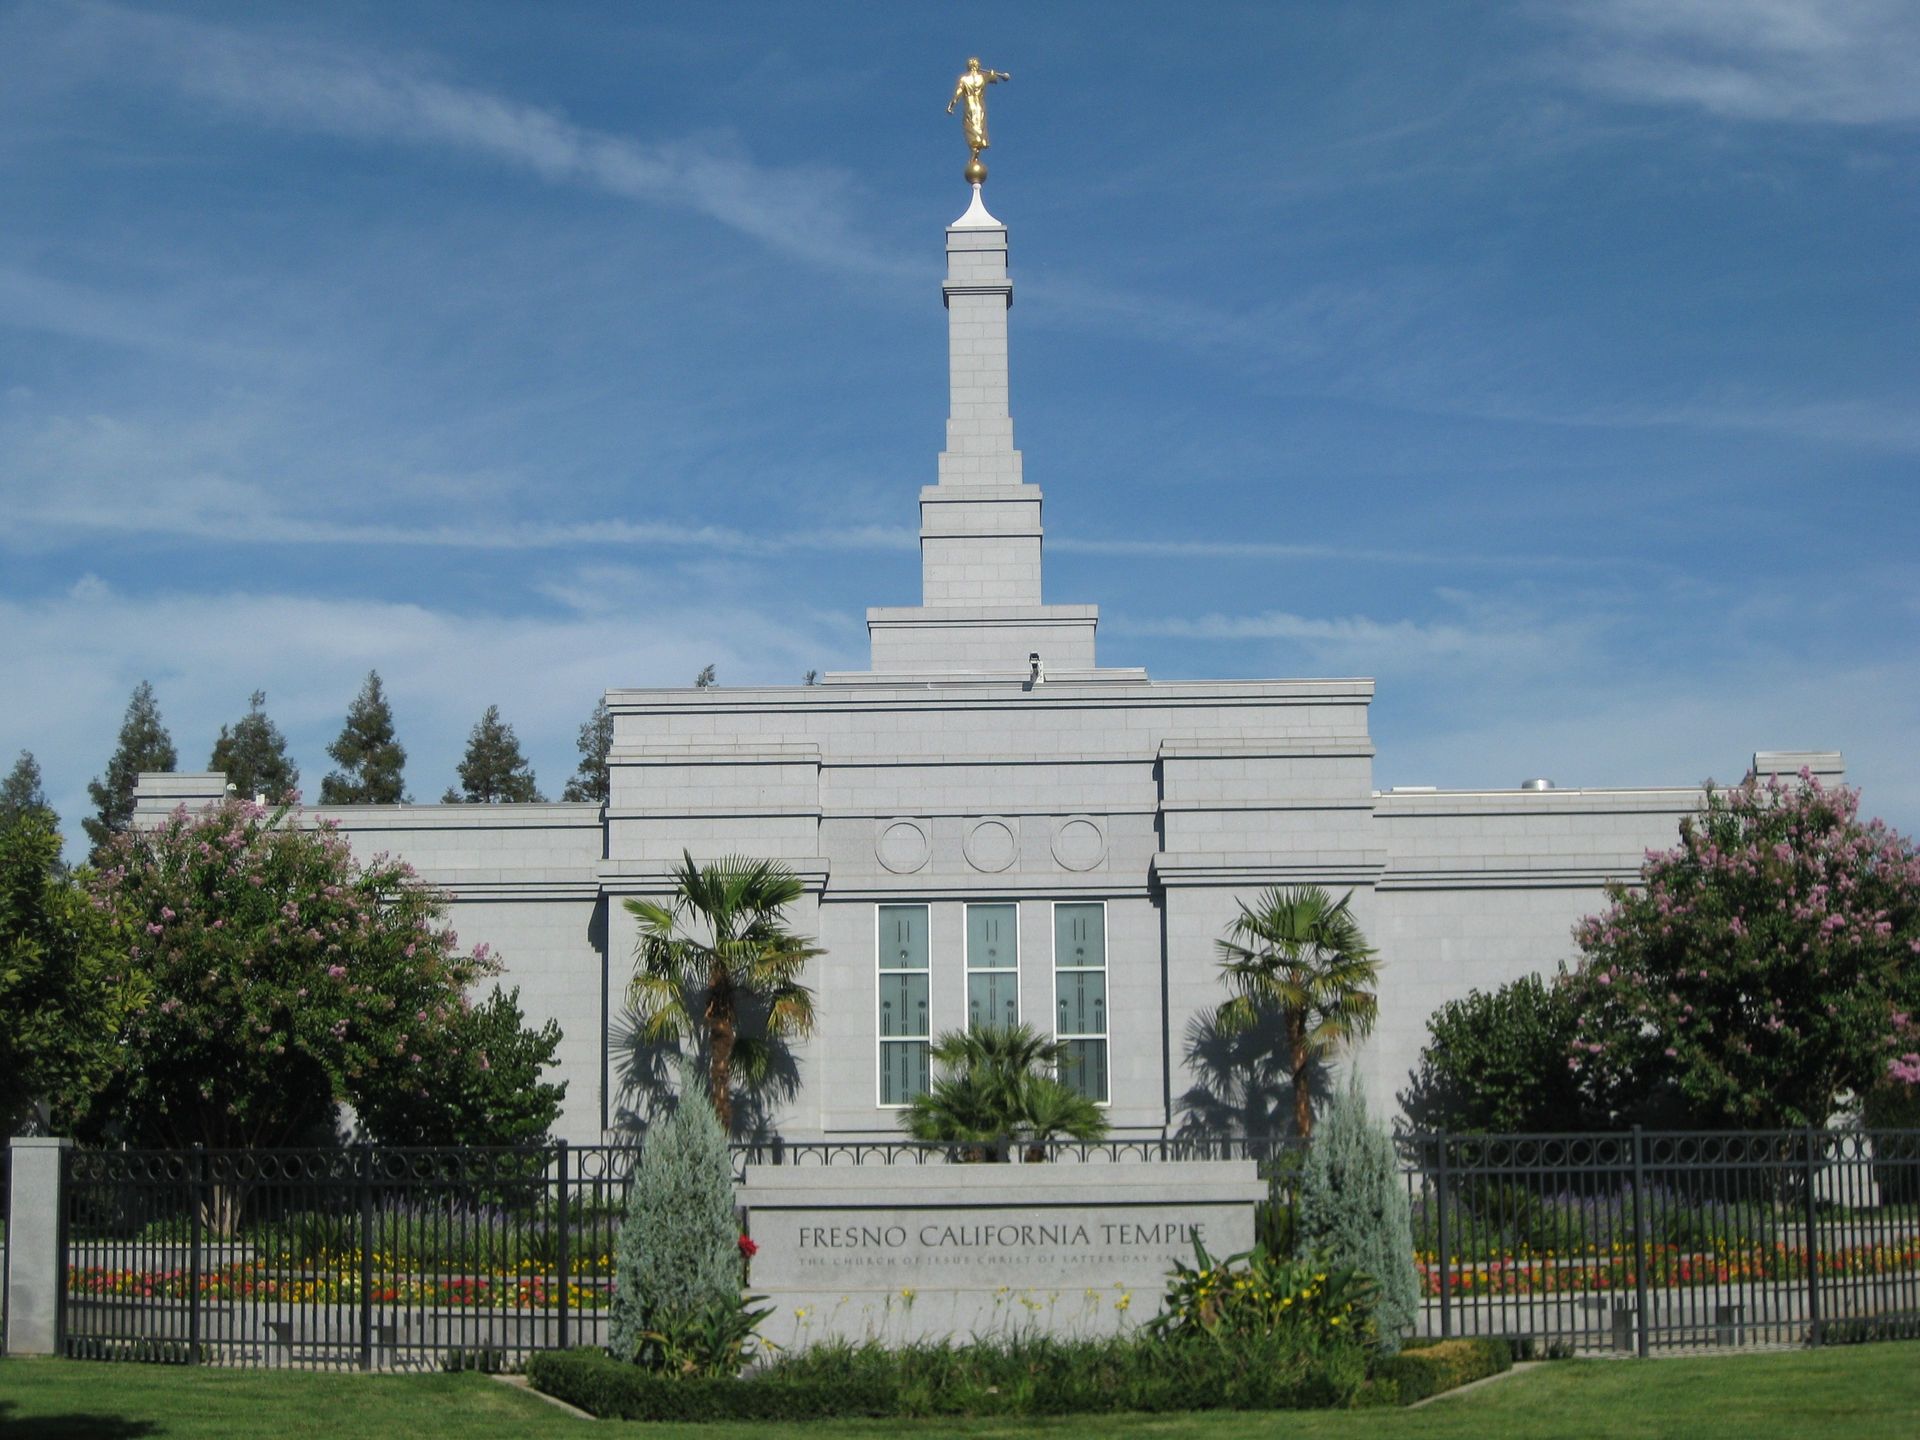 The temple name sign on the grounds of the Fresno California Temple.